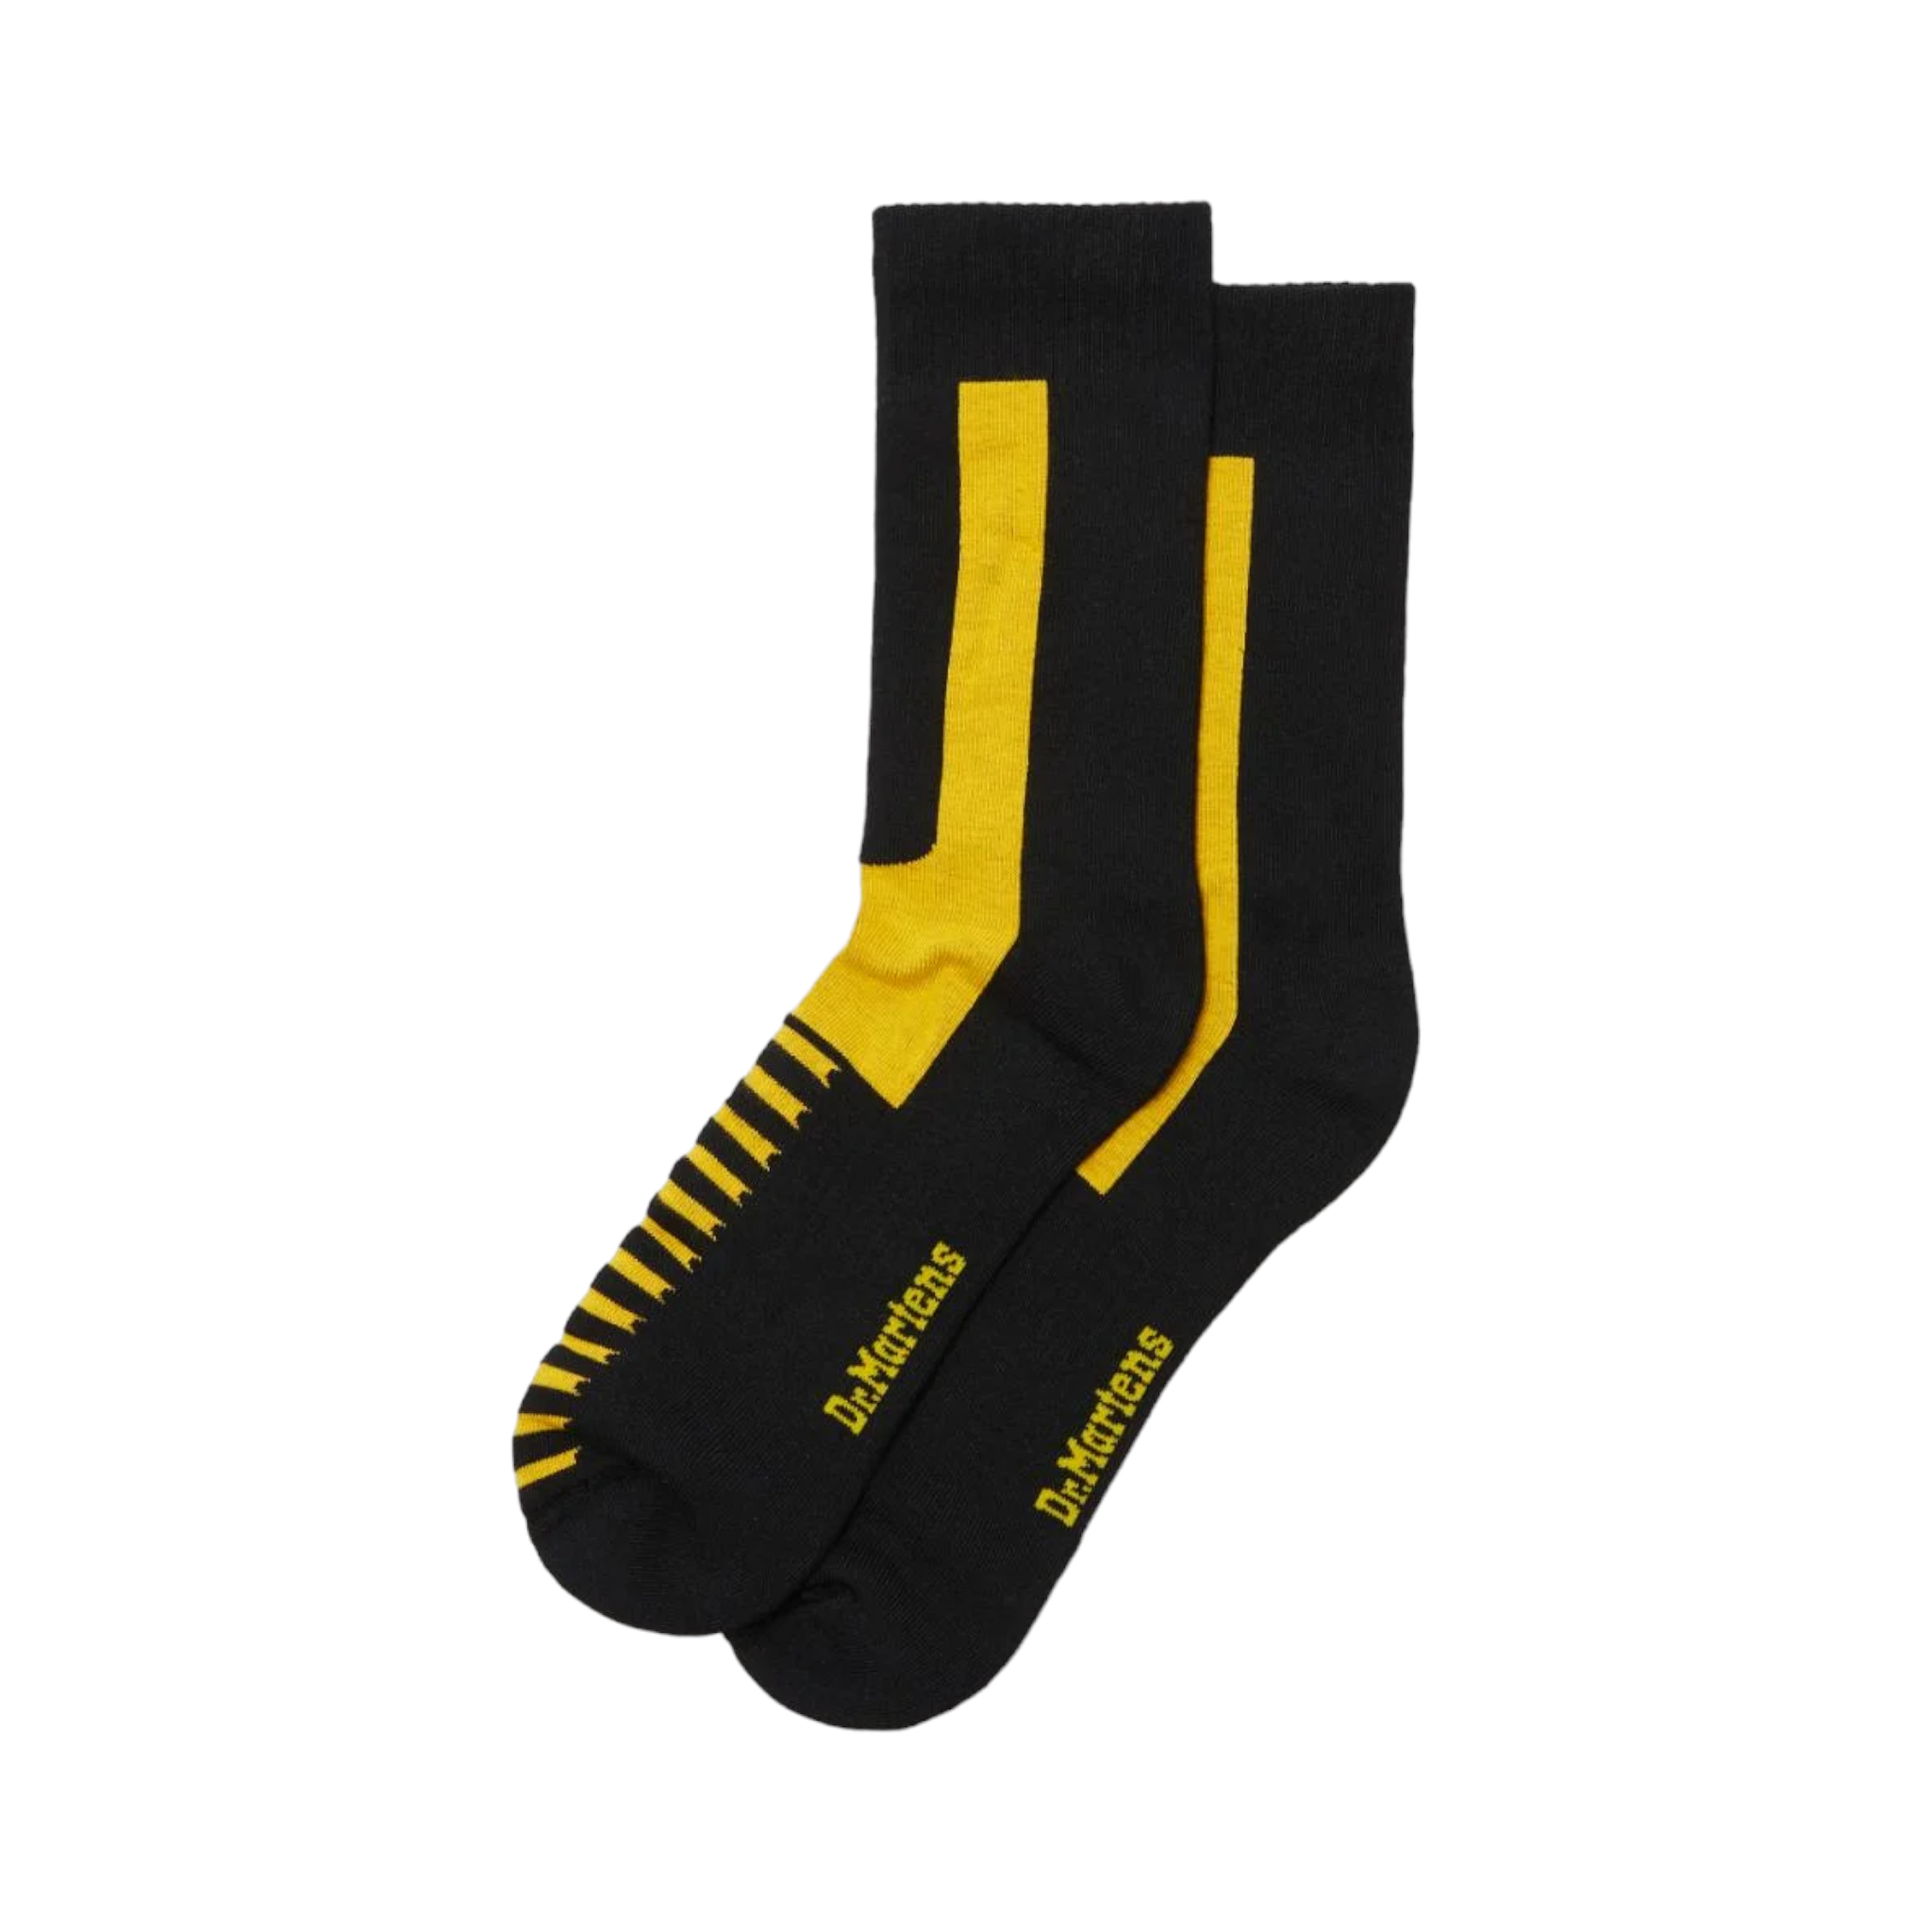 Shop Double Doc Sock - with shoe&me - from Dr. Martens - Accessories/Products - Accessories/Products, Boot, Mens, Socks, Womens - [collection]